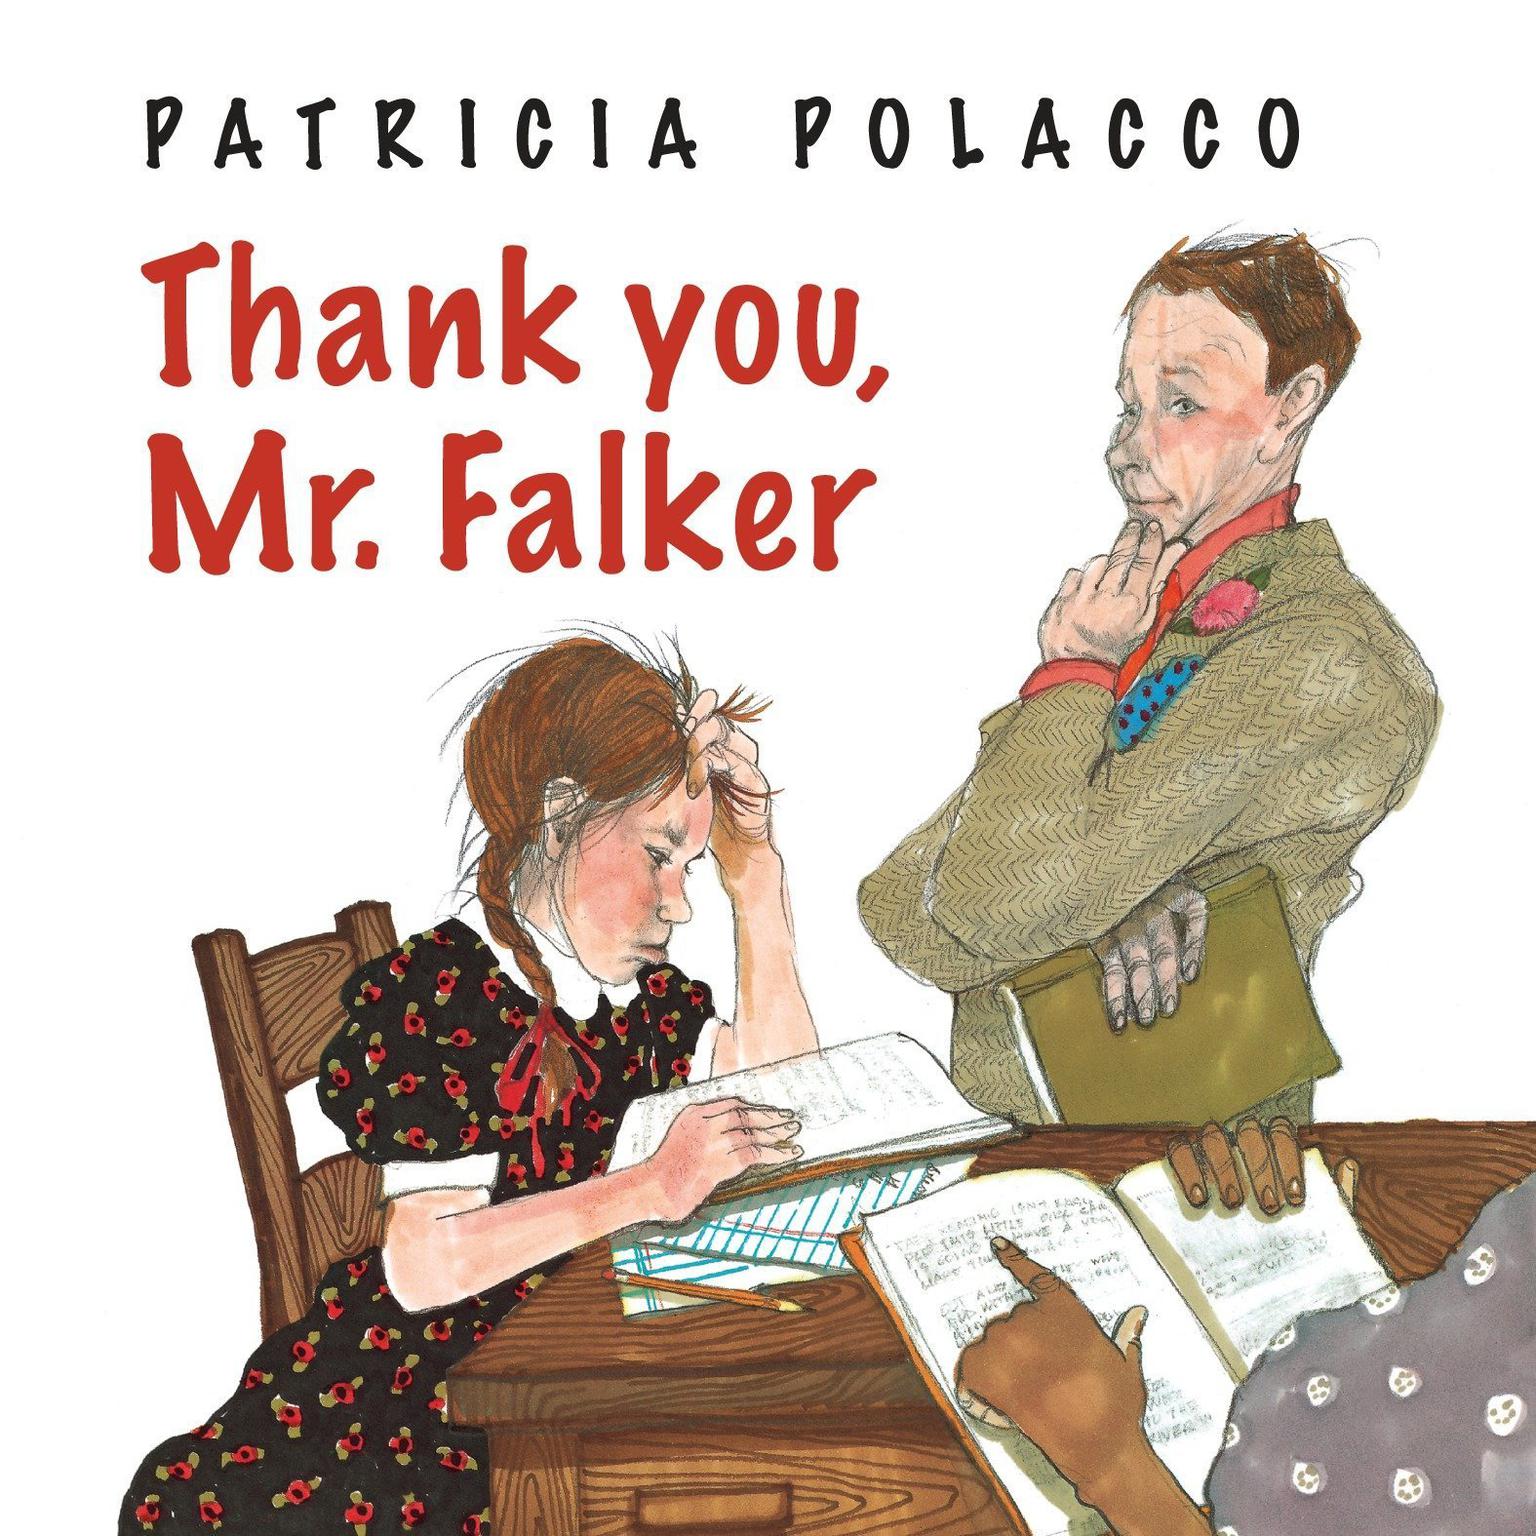 Thank You, Mr. Falker Audiobook, by Patricia Polacco